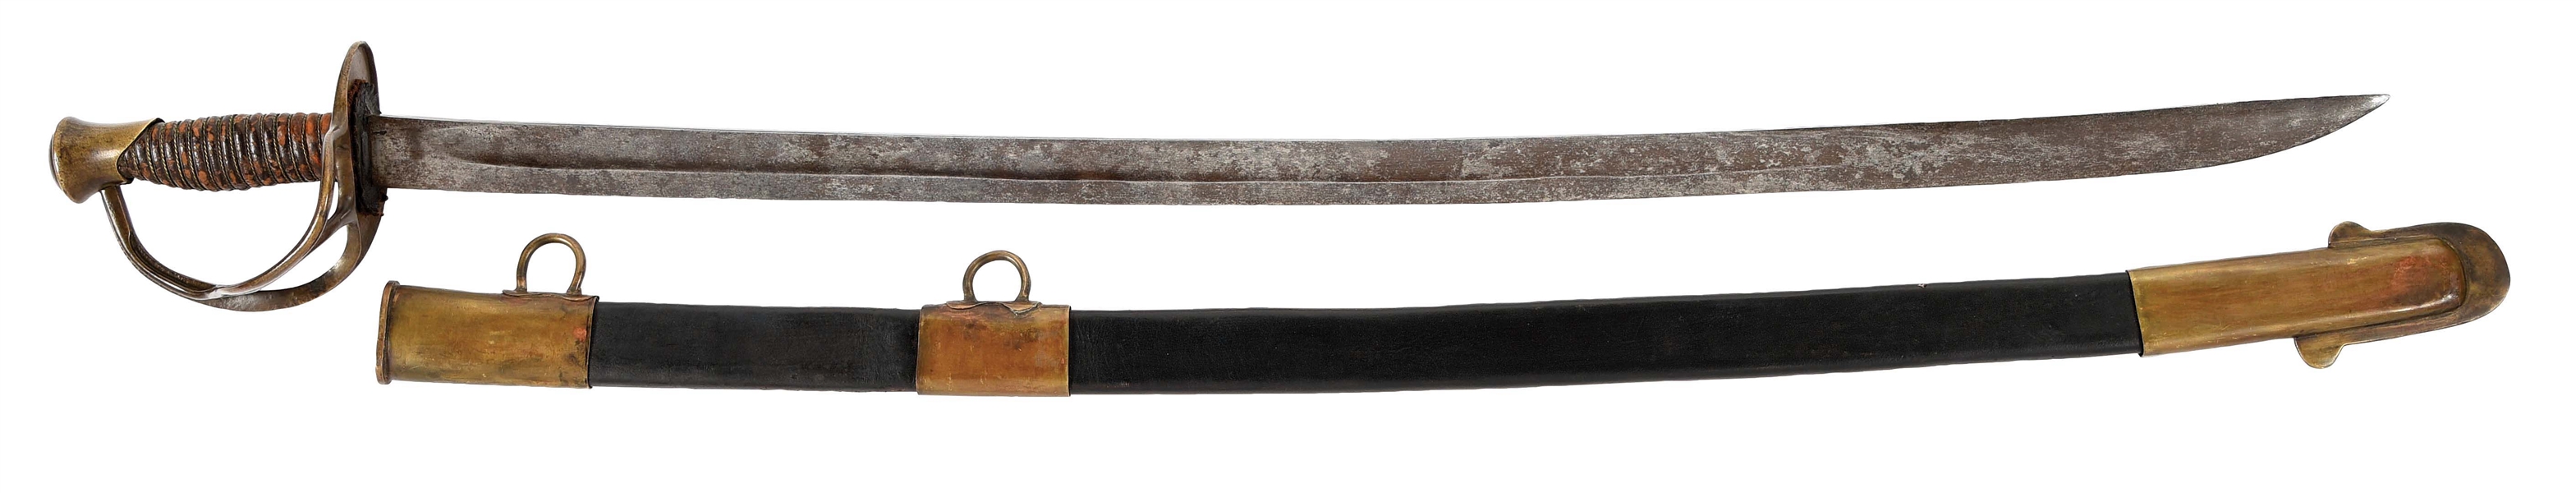 CONFEDERATE ENLISTED CAVALRY SABER MADE BY DOUGLAS OF COLUMBIA SOUTH CAROLINA.